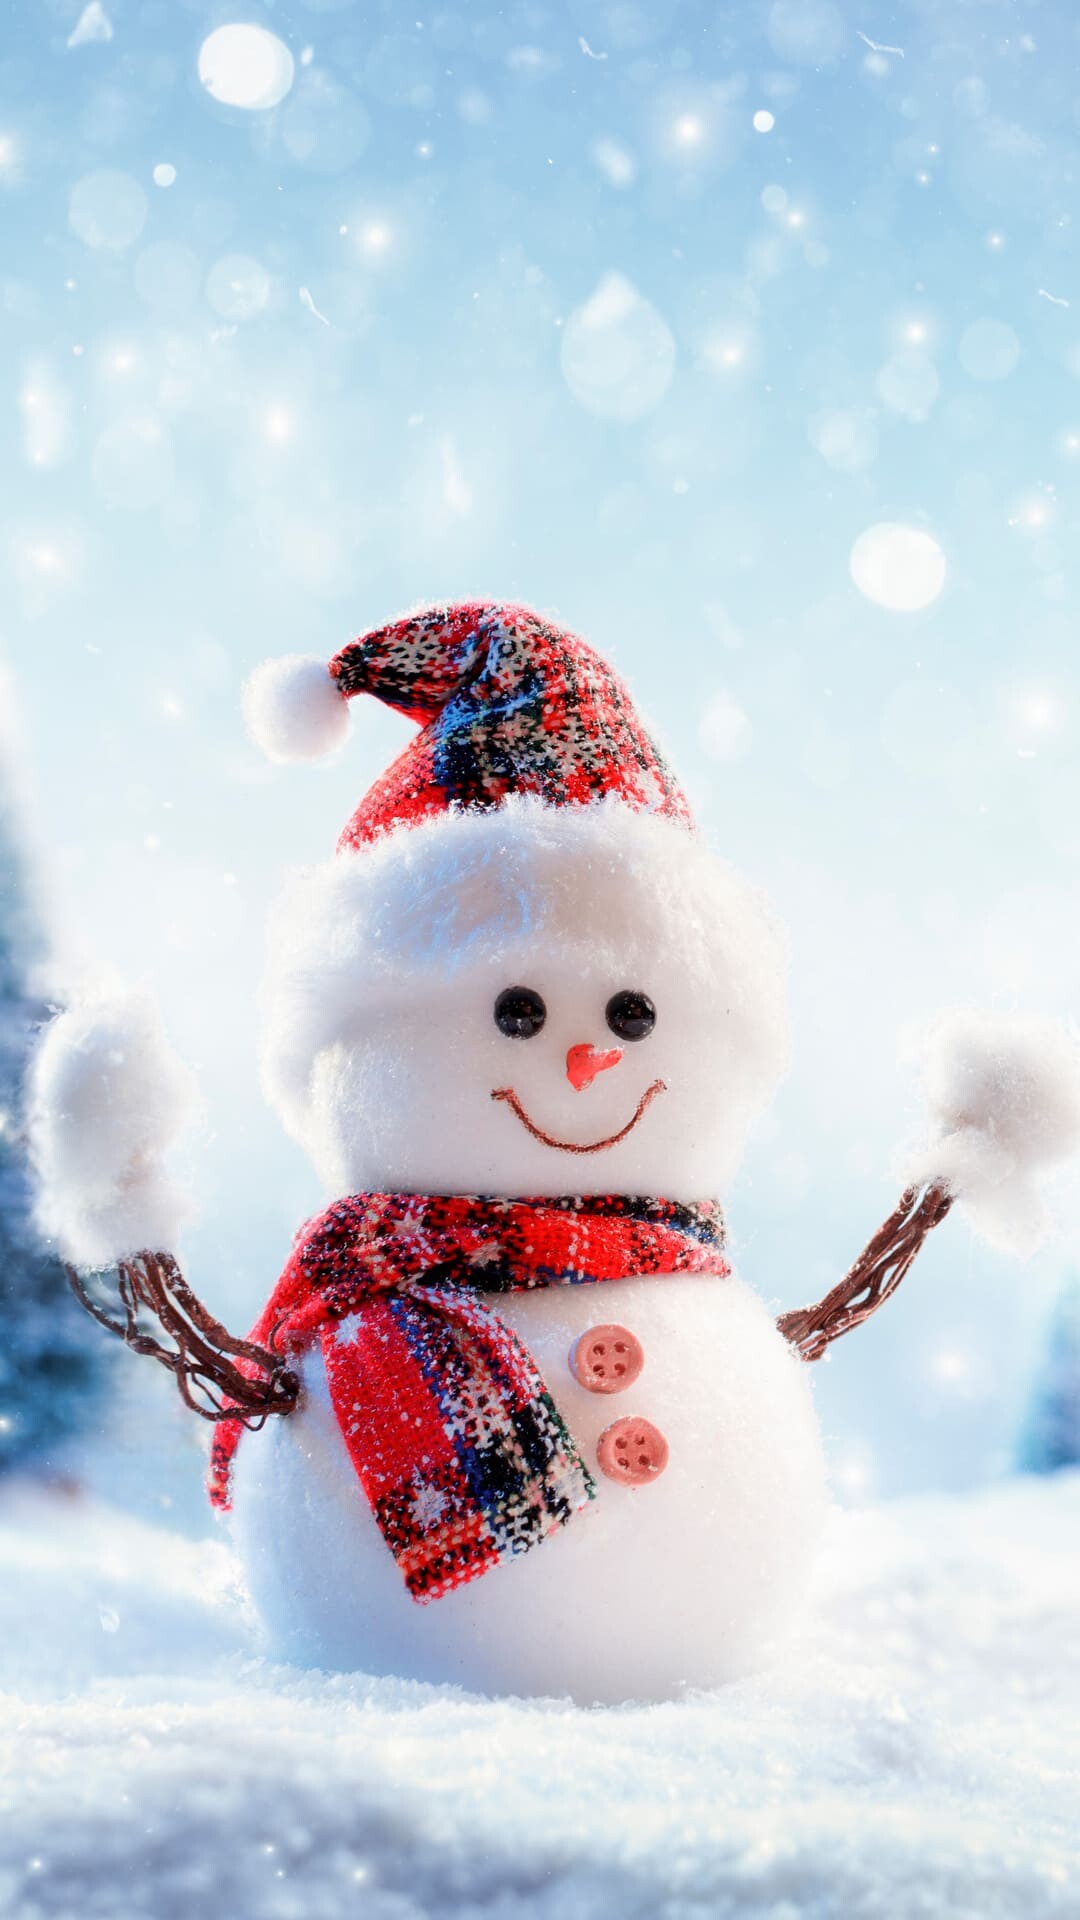 Winter: Snowman, A blanket of snow, Freezing temperatures. 1080x1920 Full HD Background.